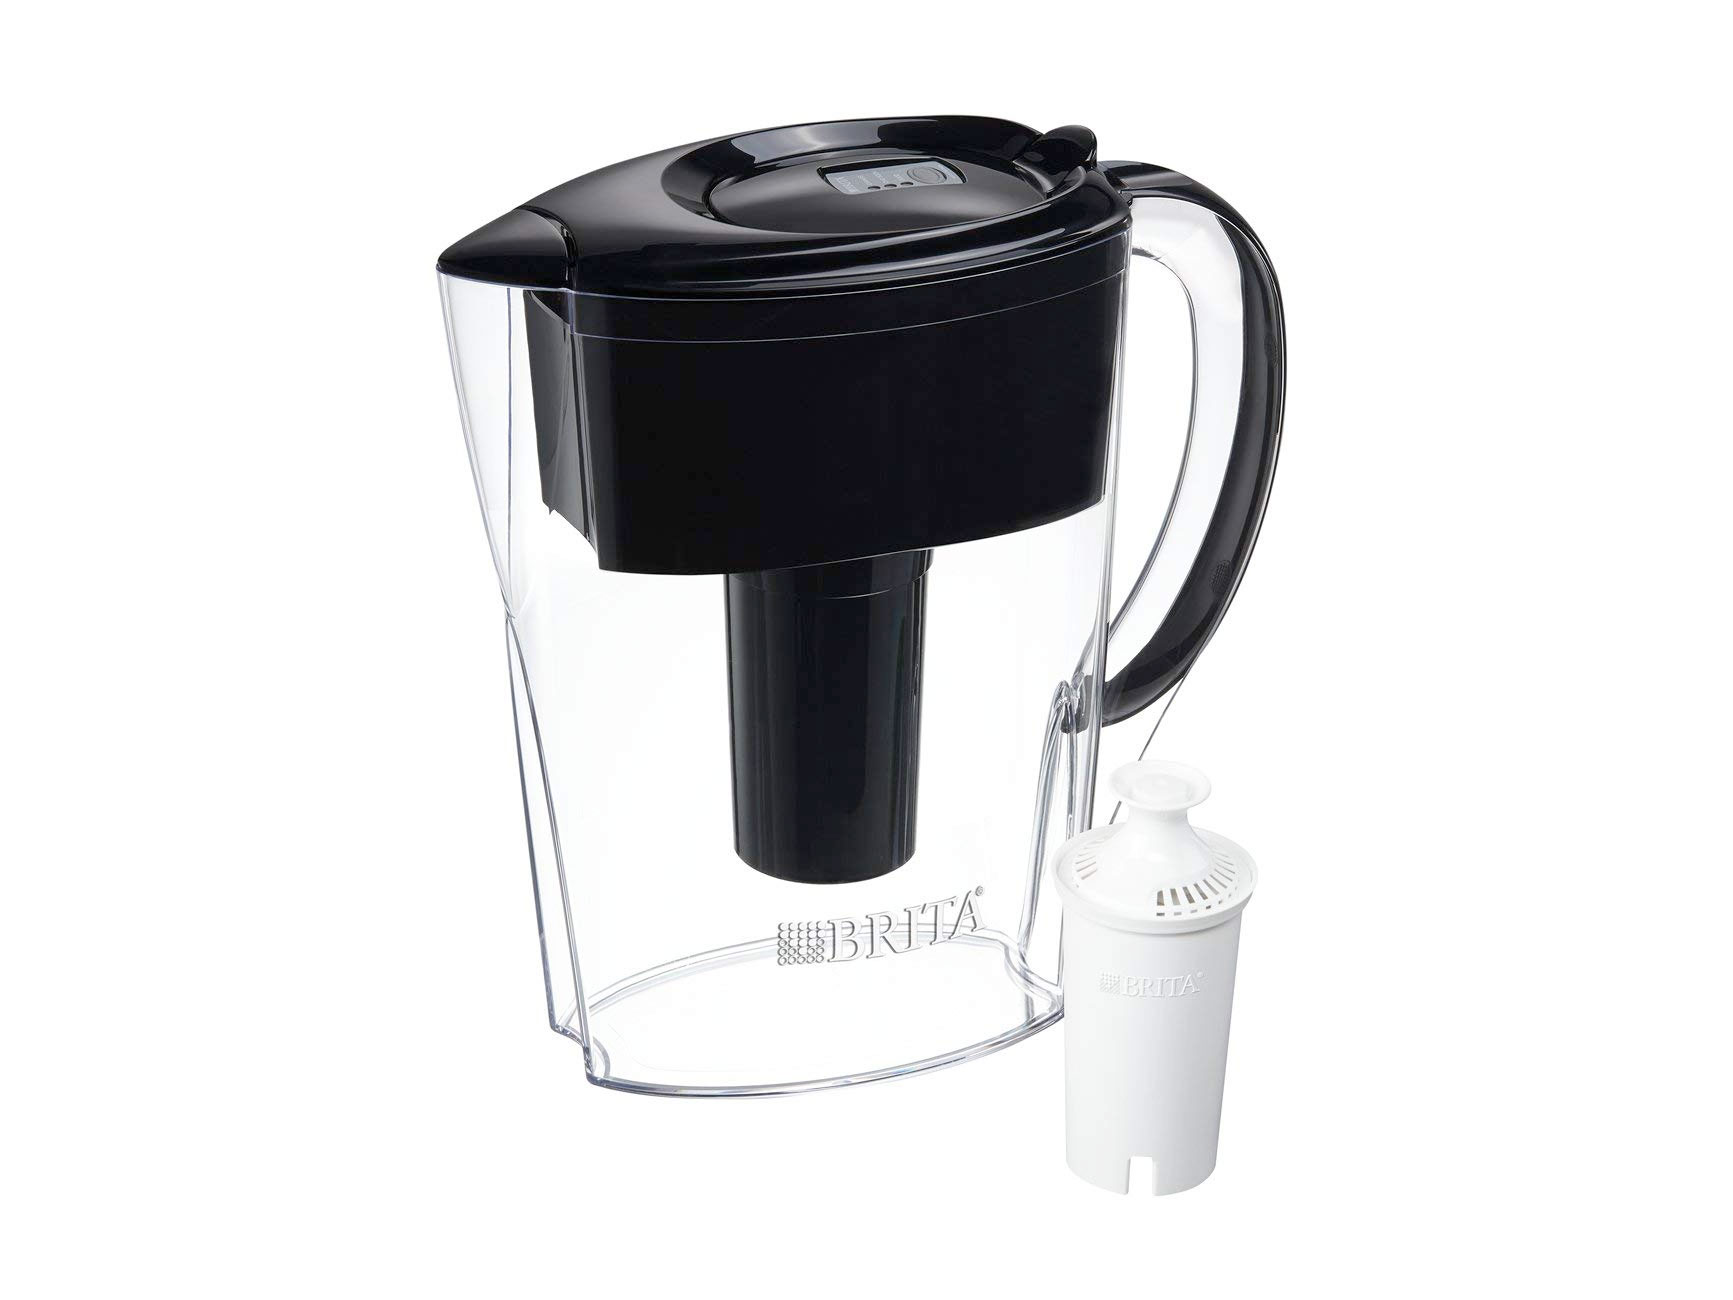 Amazon：Brita Space Saver Water Filter Pitcher with 1 Replacement Filter只賣$17.97